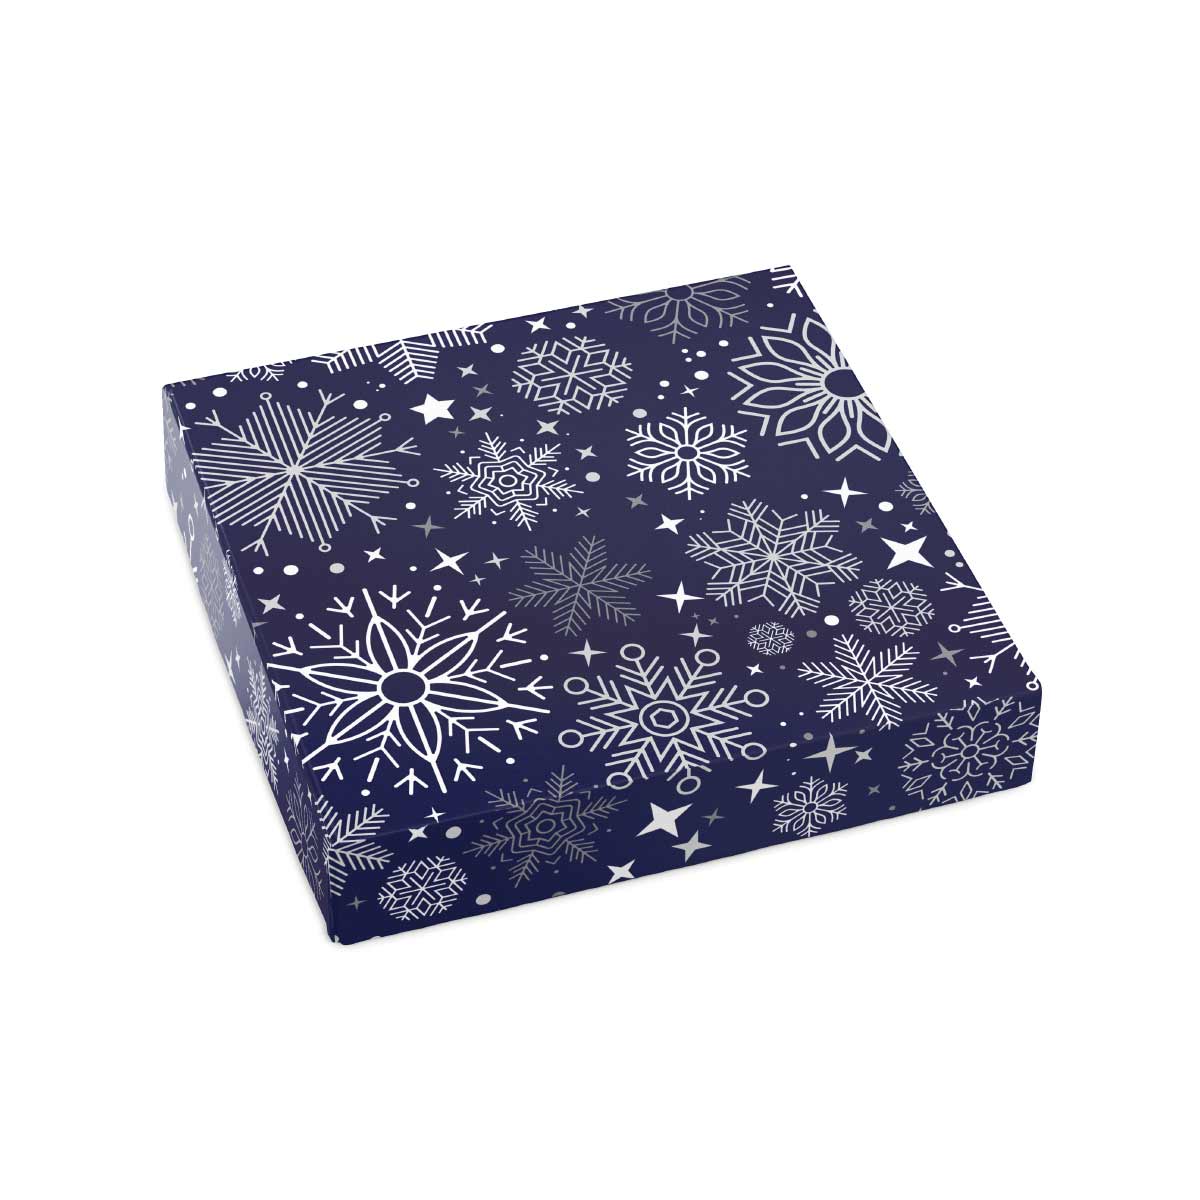 Silver Snowflakes with Navy Background Cover for 9 piece chocolate assortment